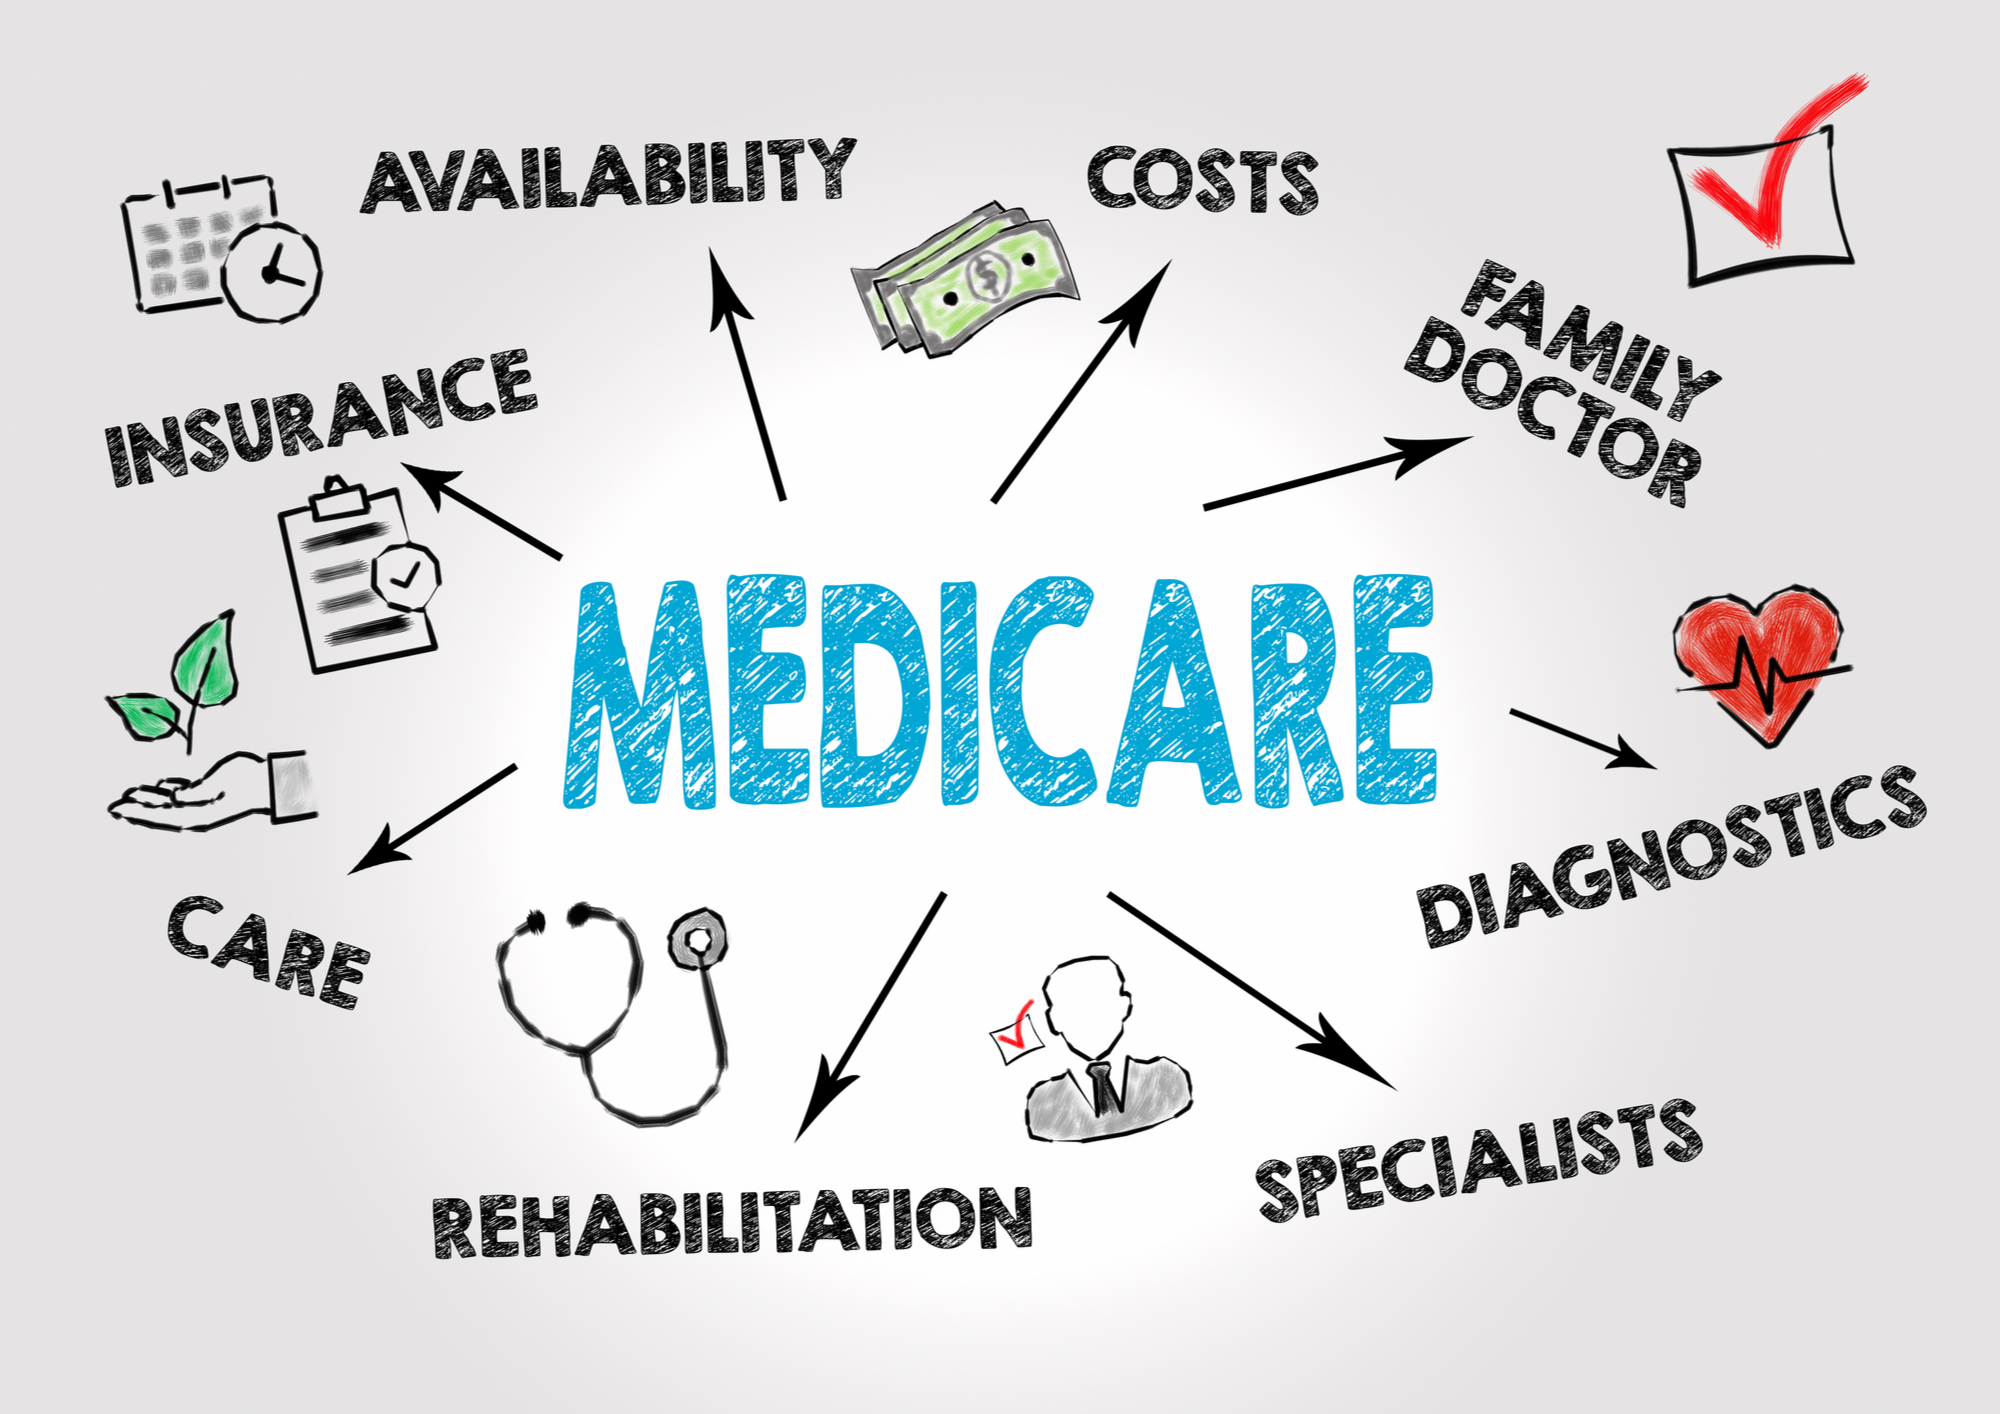 4 Useful Tips to Apply While Selling Medicare